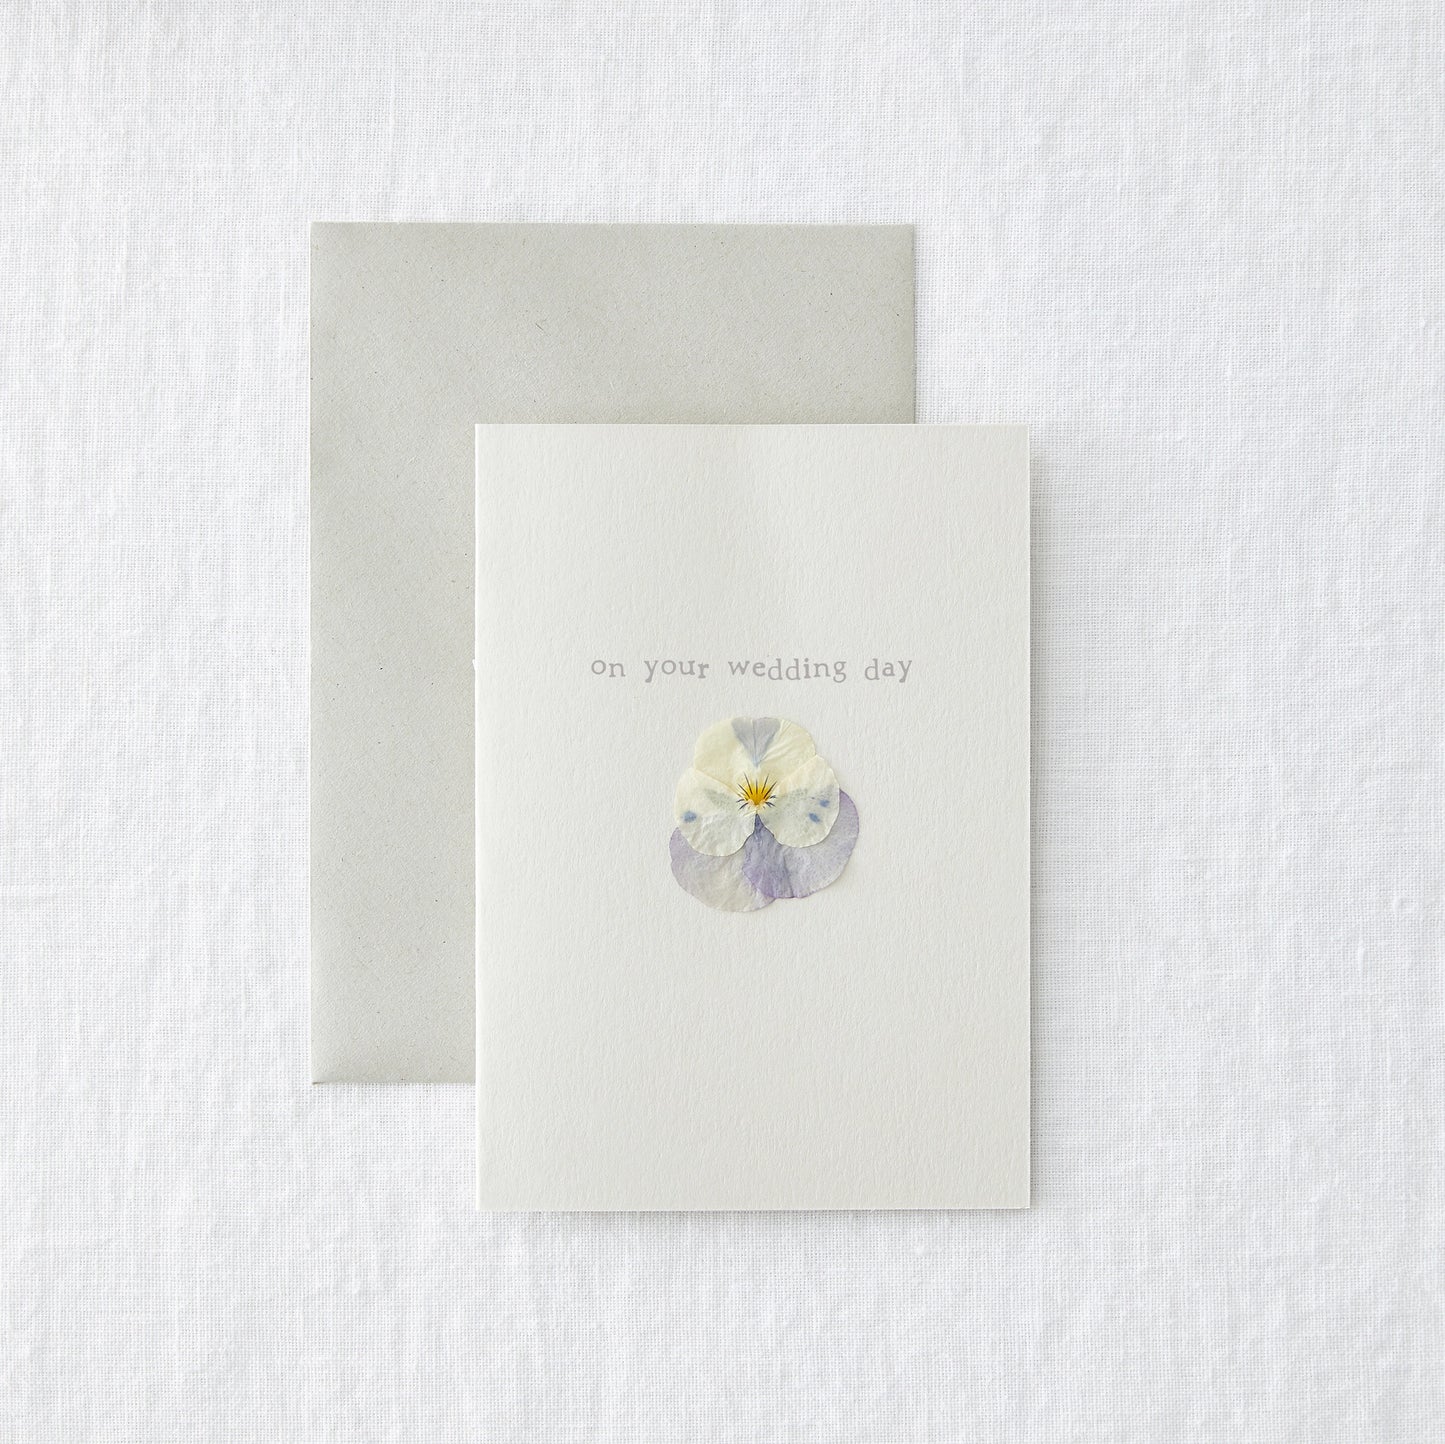 Wedding Day Card with Pressed Flower